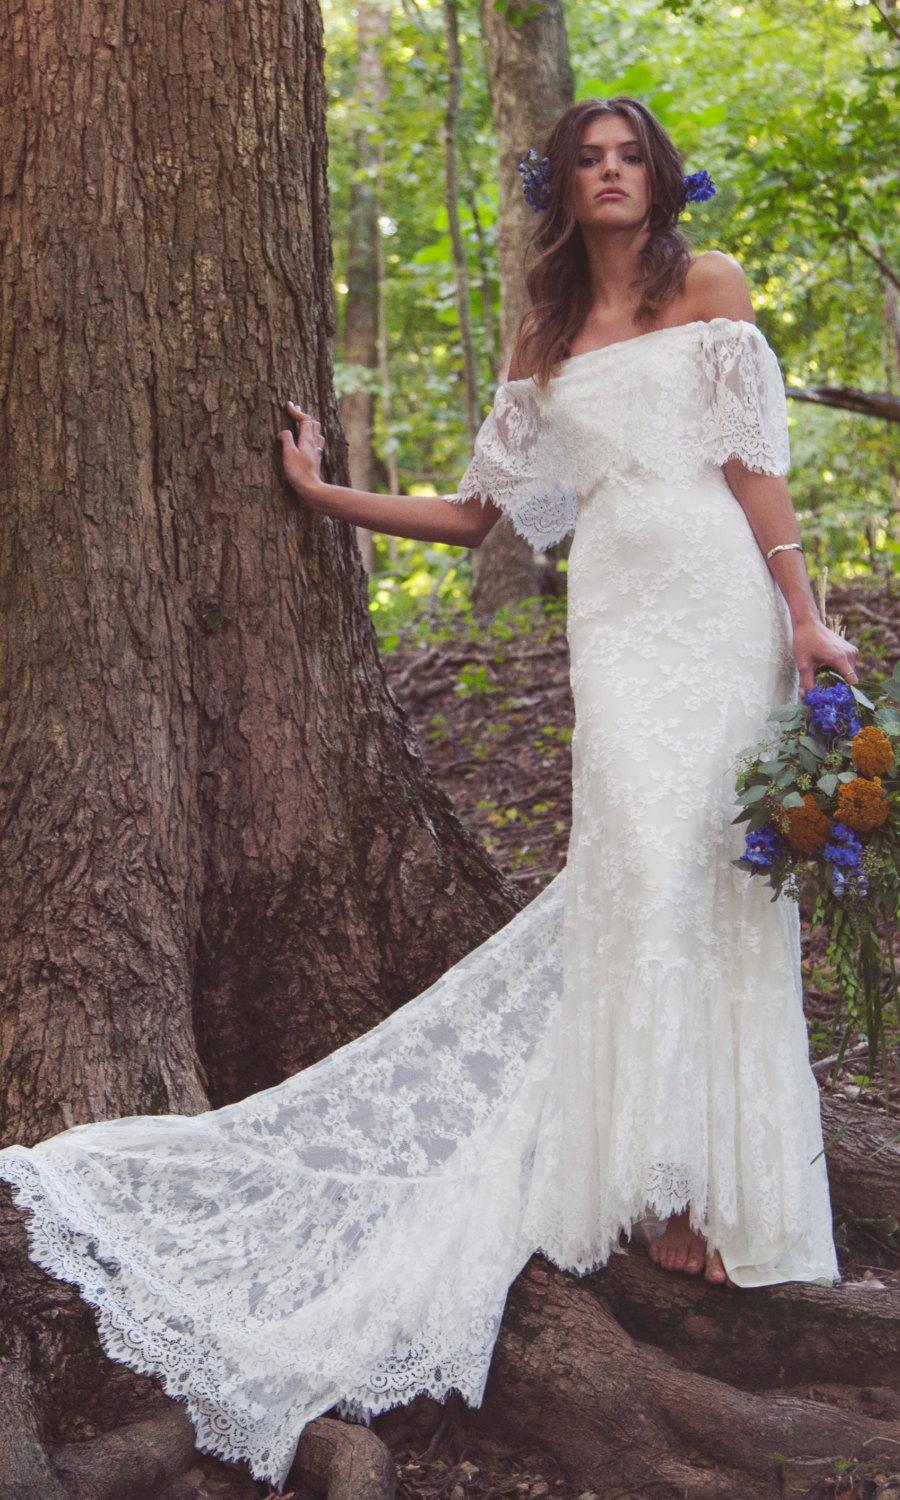 Mariage - Off The Shoulder Wedding Dress, Lace Bridal Gown, Scalloped Lace Wedding Dress, Vintage Inspired Gown - "Laurence"